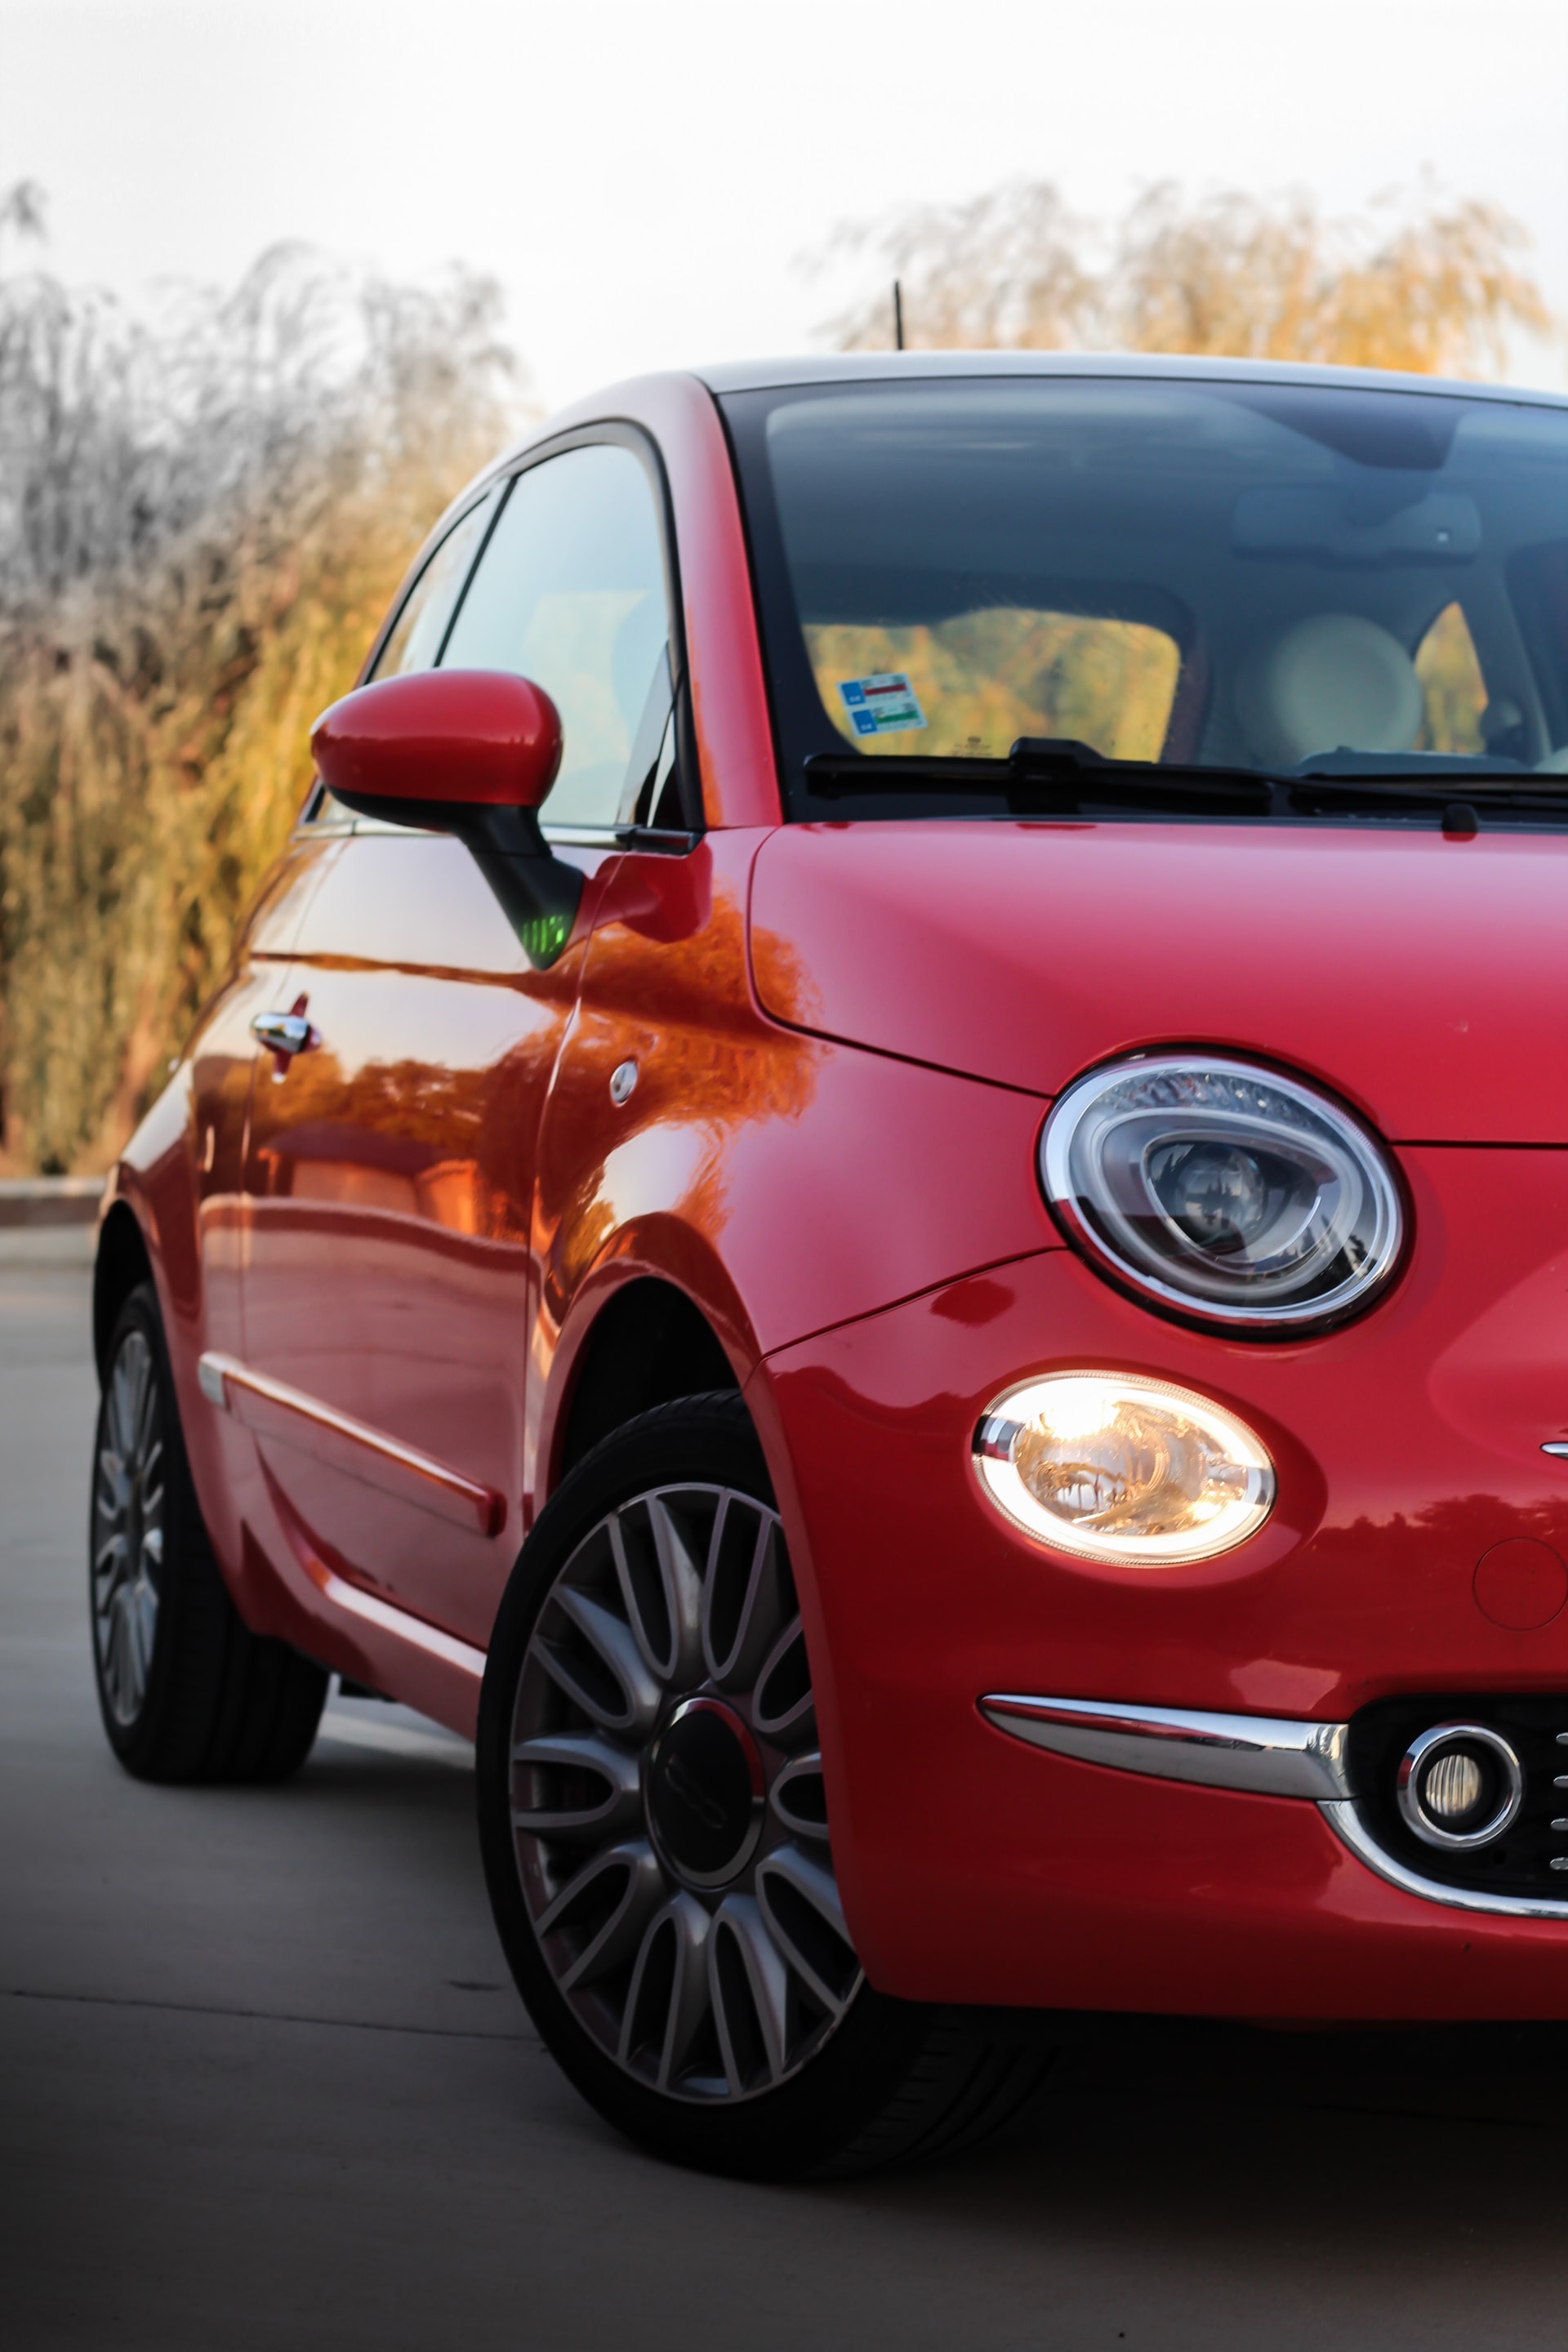 Rent a Fiat from Ecovia Car Rental